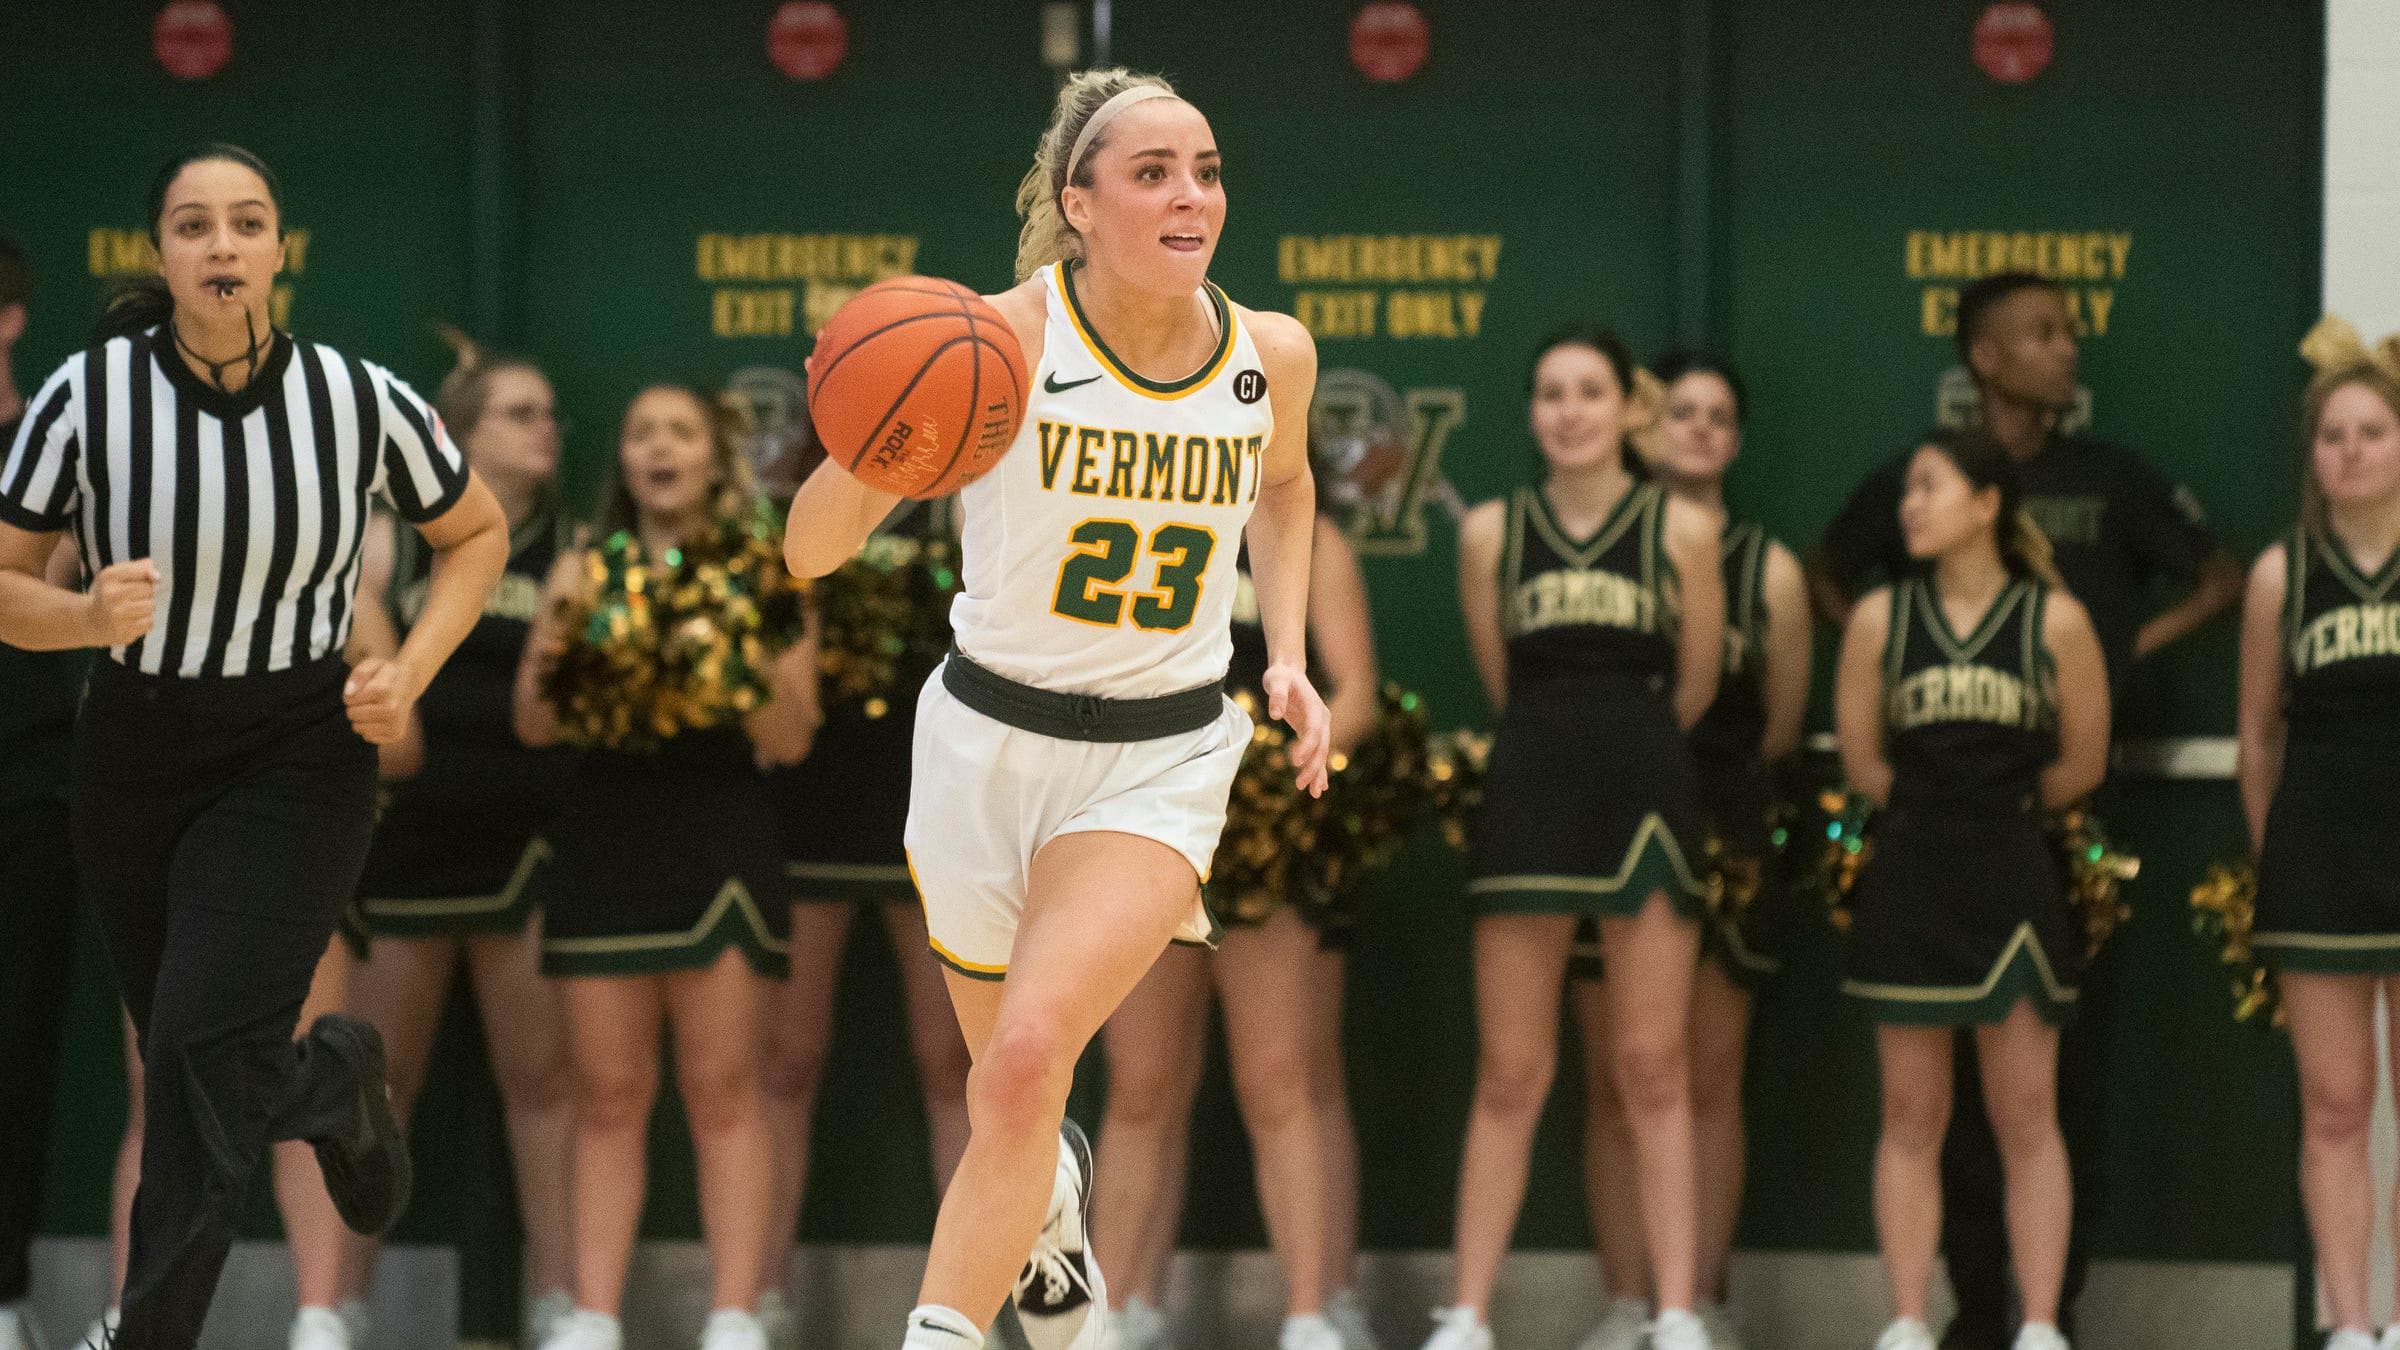 Indiana High School Standouts Propel Vermont Women’s Basketball in WNIT Tournament